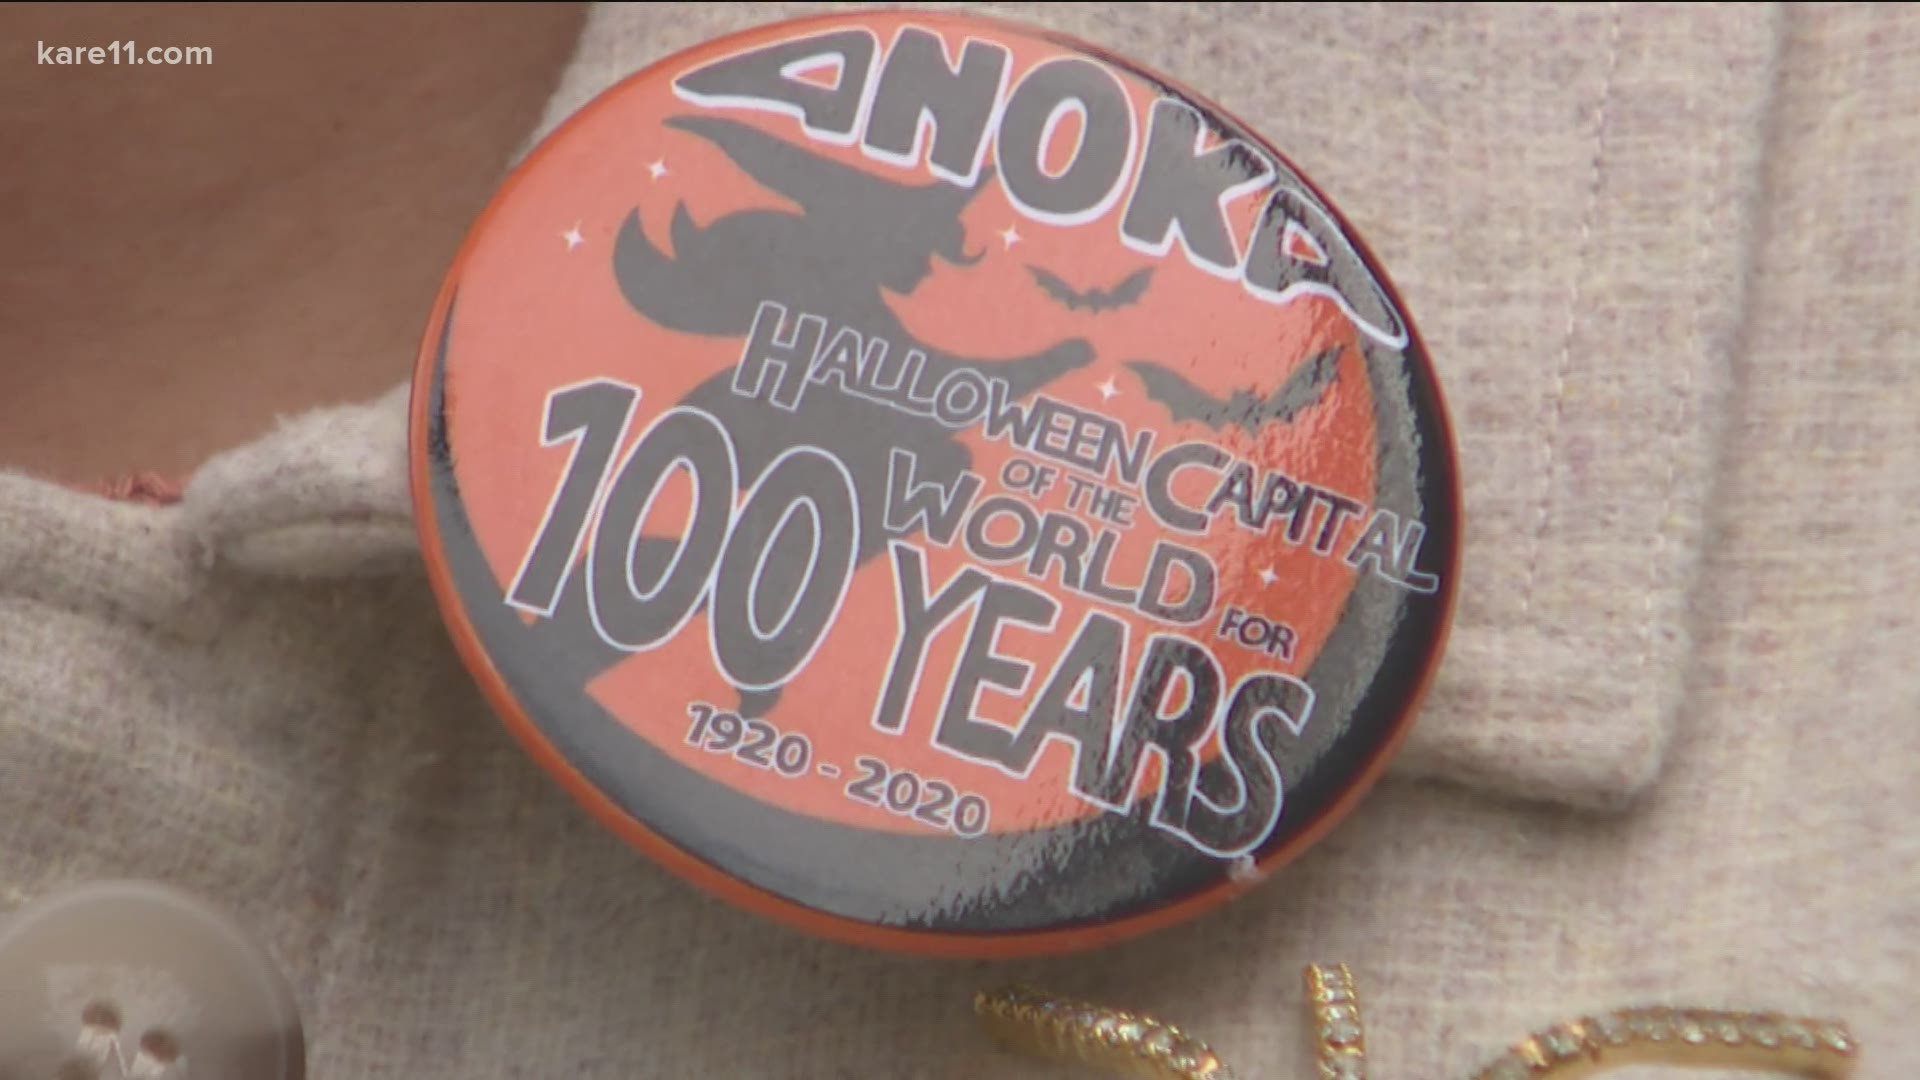 The COVID-19 pandemic has had a huge impact on many traditions, including the big Anoka Halloween event that happens each year. But volunteers are adapting.